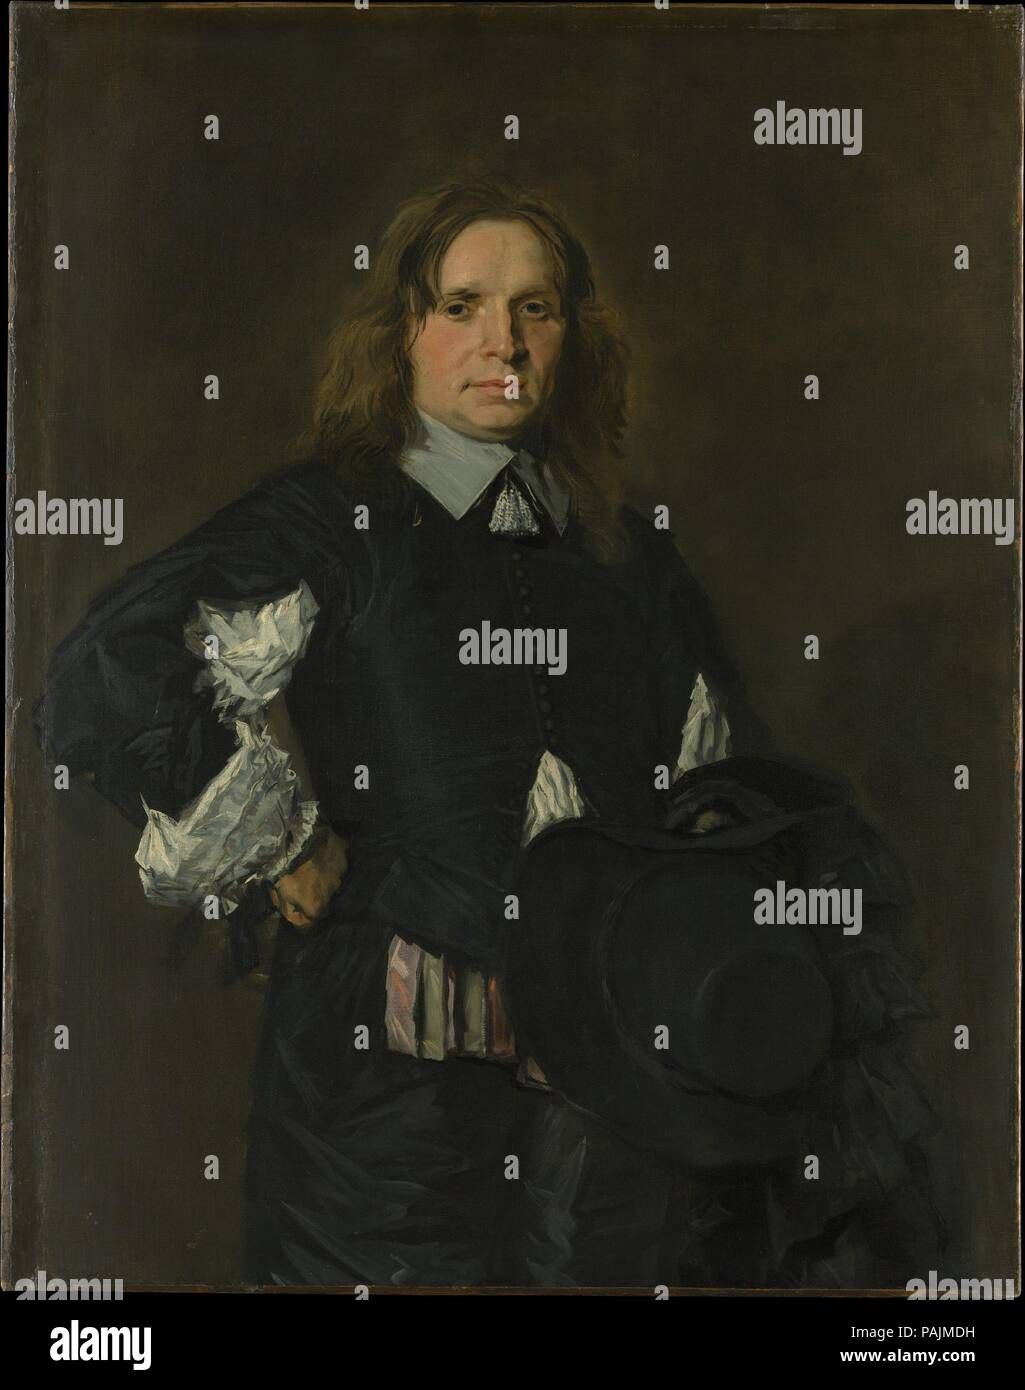 Portrait of a Man. Artist: Frans Hals (Dutch, Antwerp 1582/83-1666 Haarlem). Dimensions: 43 1/2 x 34 in. (110.5 x 86.4 cm). Date: early 1650s.  In this canvas of the early 1650s, the figure's pose follows a pattern Hals employed twenty years earlier, but here the arrangement is more frontal and contained. The resulting impression of reserve or authority is relieved by the relaxed expression, and perhaps by the French fashions of flounced sleeves and colorful ribbons at the waist. Vivid brushwork and the nearness of the foreshortened hat add to the portrait's immediacy. Museum: Metropolitan Mus Stock Photo